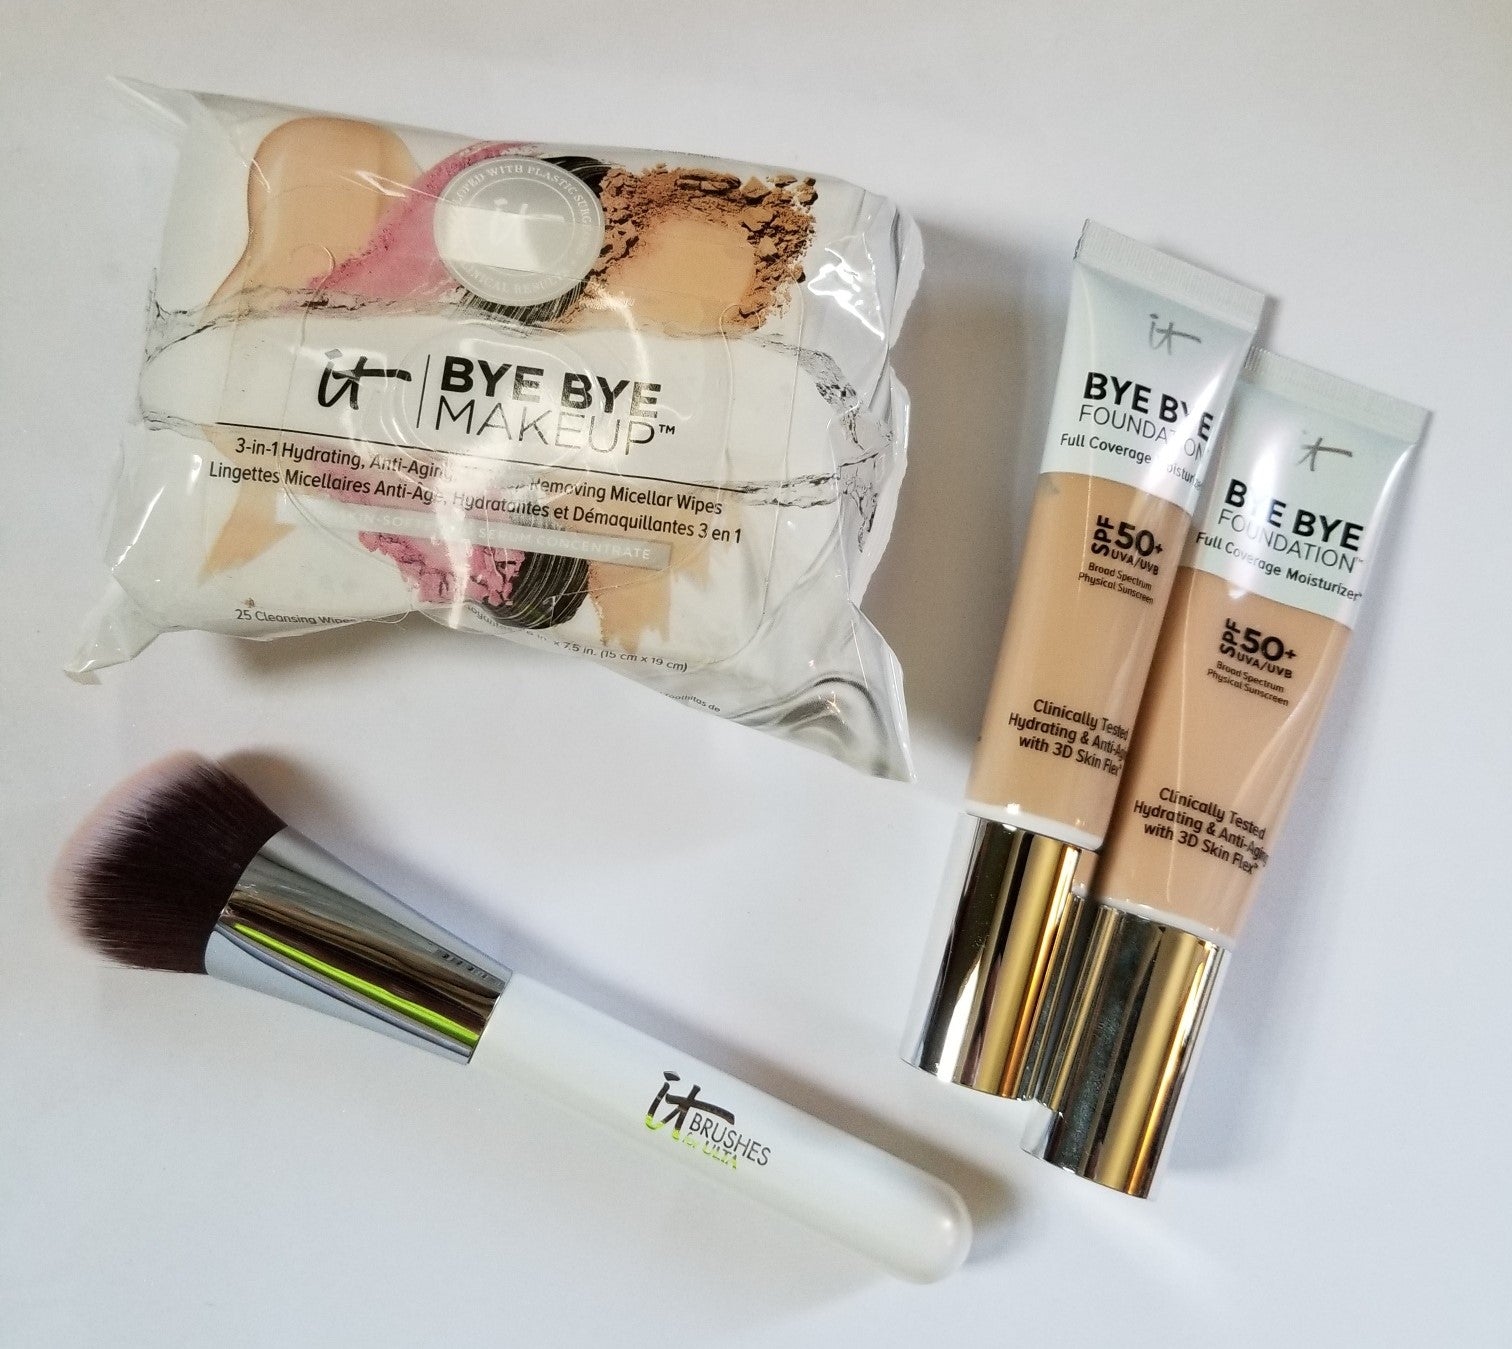 Review, Swatches, Photos, Makeup Trends 2018, 2019, 2020: IT Cosmetics, Bye Bye Foundation, Full Coverage, Bye Bye Makeup, Micellar Wipes, Airbrush Complexion Brush #77, ULTA Exclusive